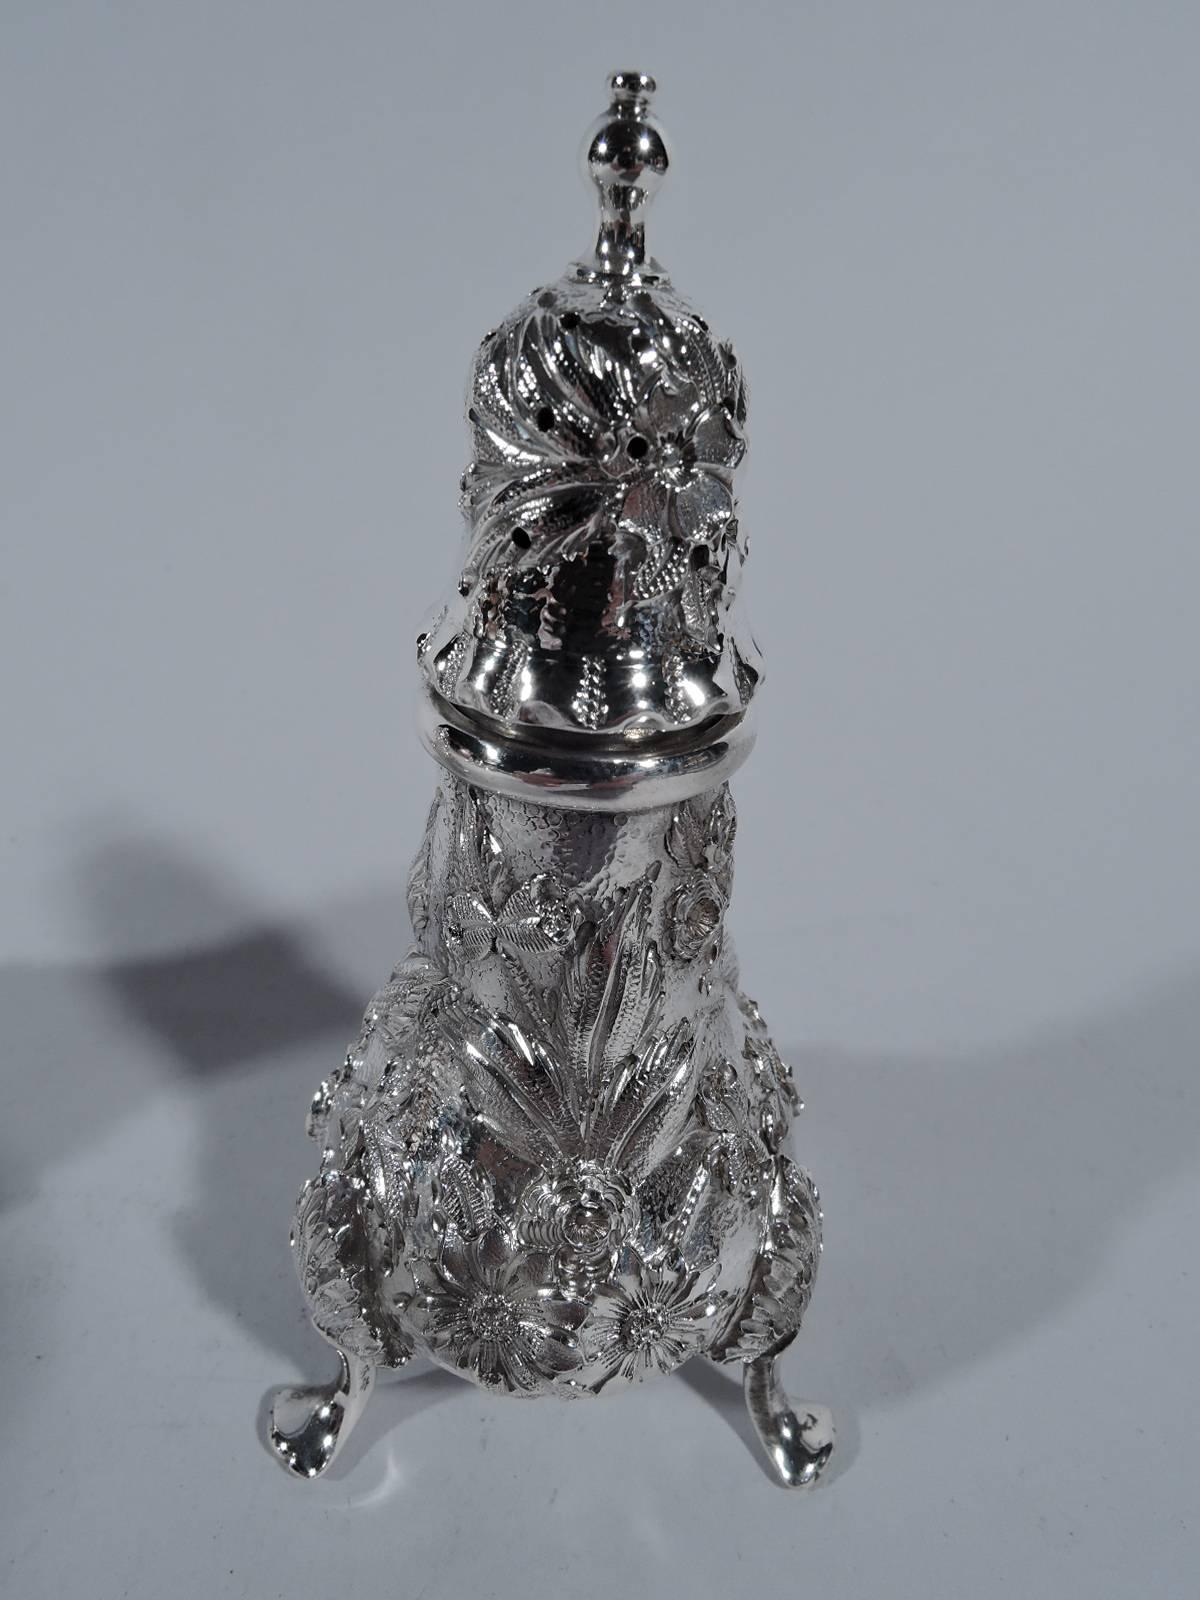 Pair of pretty repousse sterling silver salt and pepper shakers. Made by S. Kirk & Son Inc. in Baltimore, circa 1930. Each: Baluster body with pierced dome cover and three leaf-mounted supports. Floral repousse on stippled ground. Hallmark includes